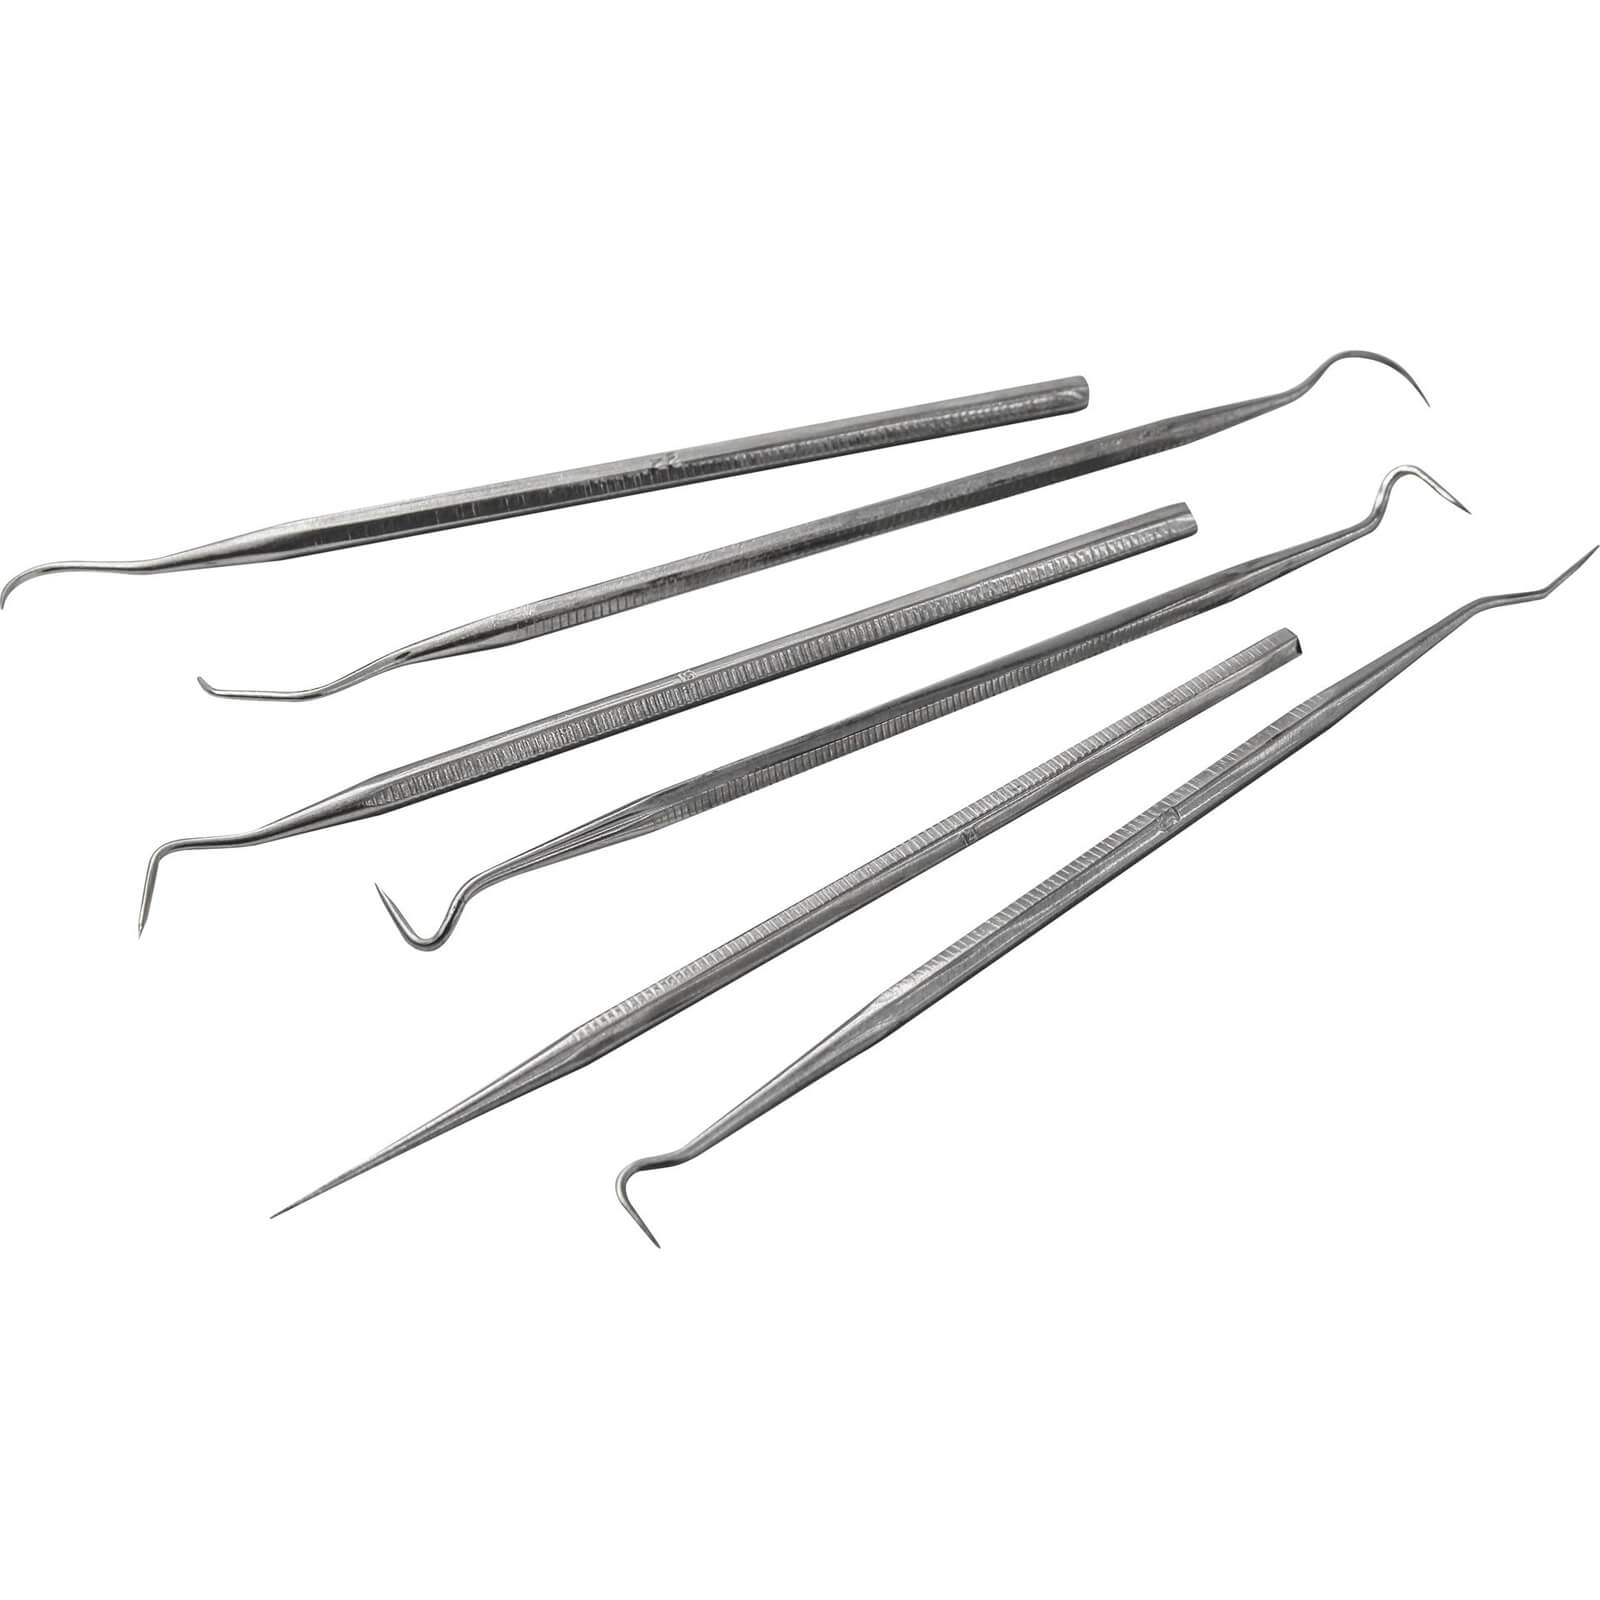 Image of Faithfull 6 Piece Stainless Steel Hook and Pick Set